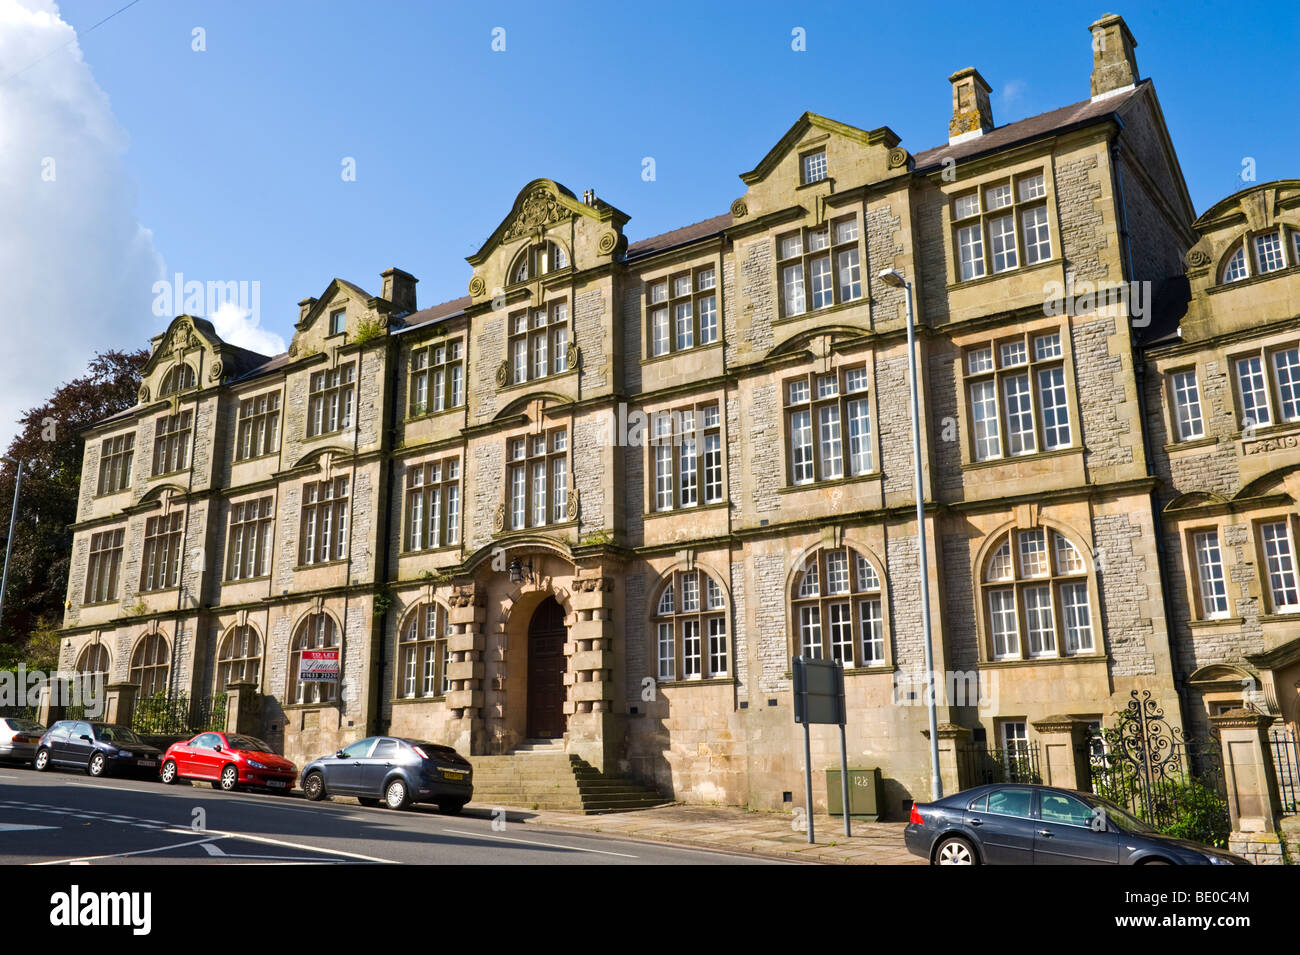 Former civic building dated 1913 now let for office space in city of Newport South Wales UK Stock Photo